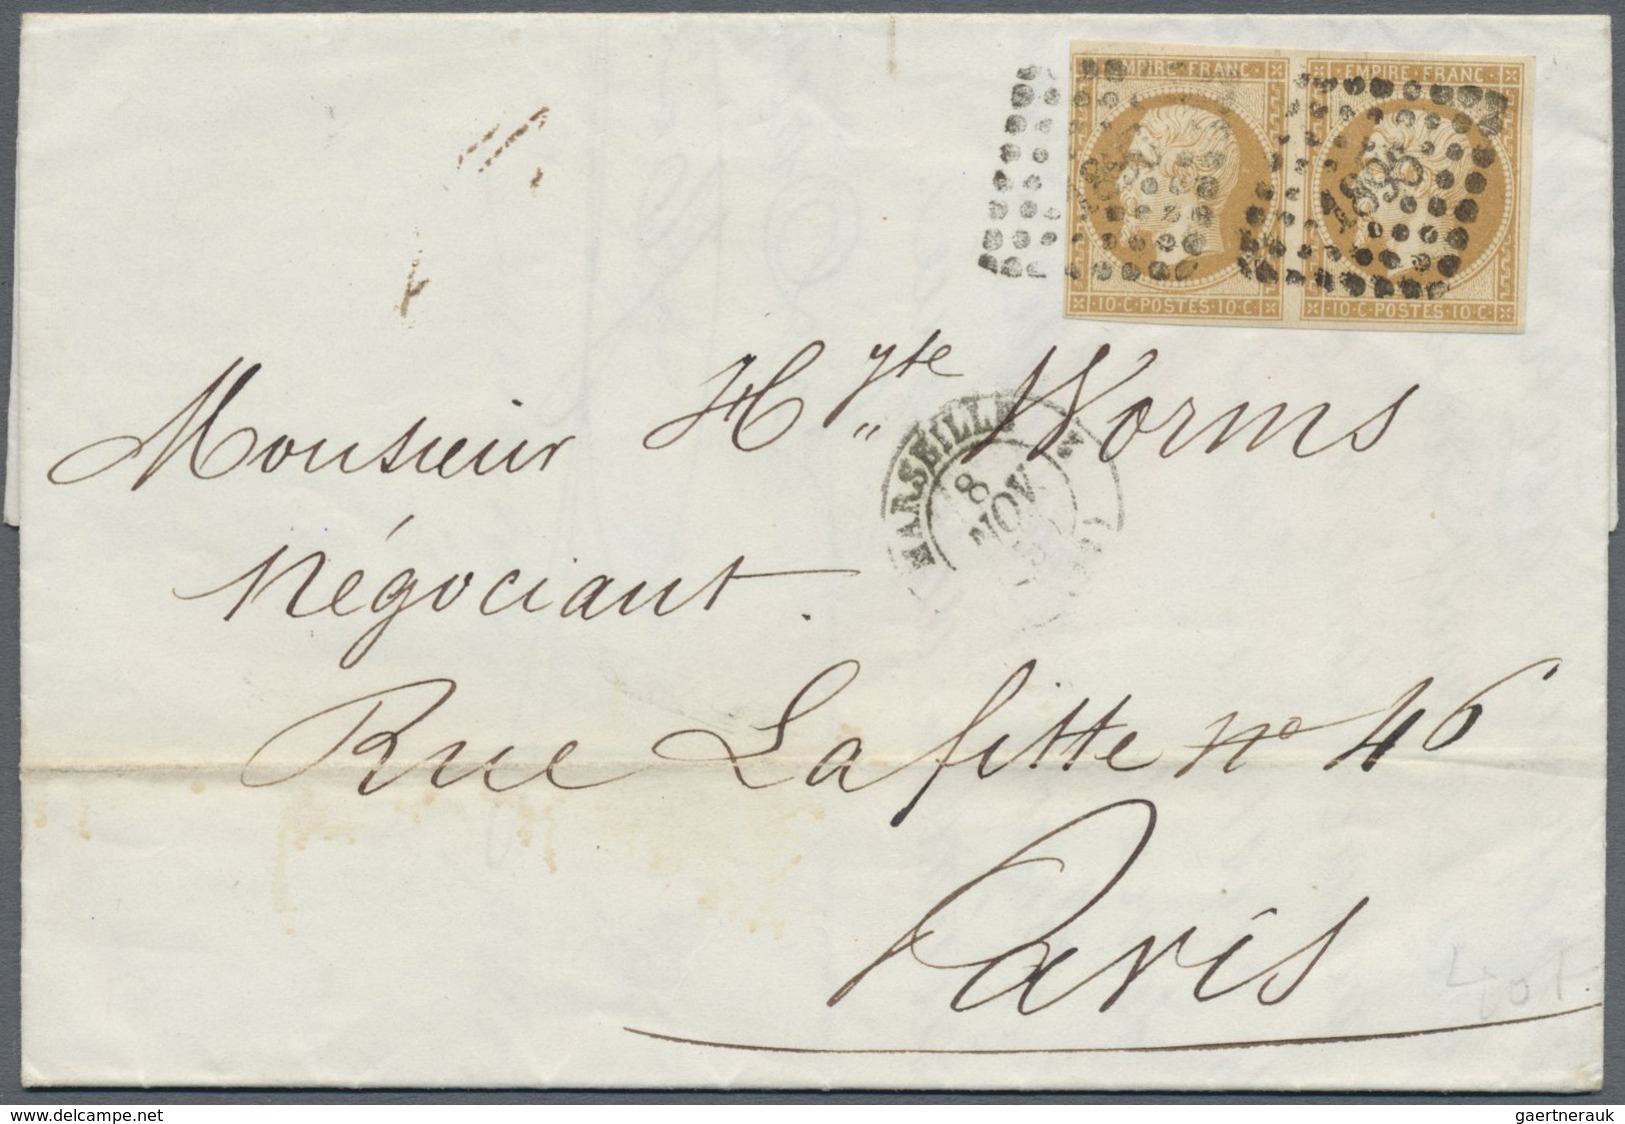 Br Frankreich: 1850/1875, CERES and NAPOLEON (various issues), holding of apprx. 540 entires, varied co